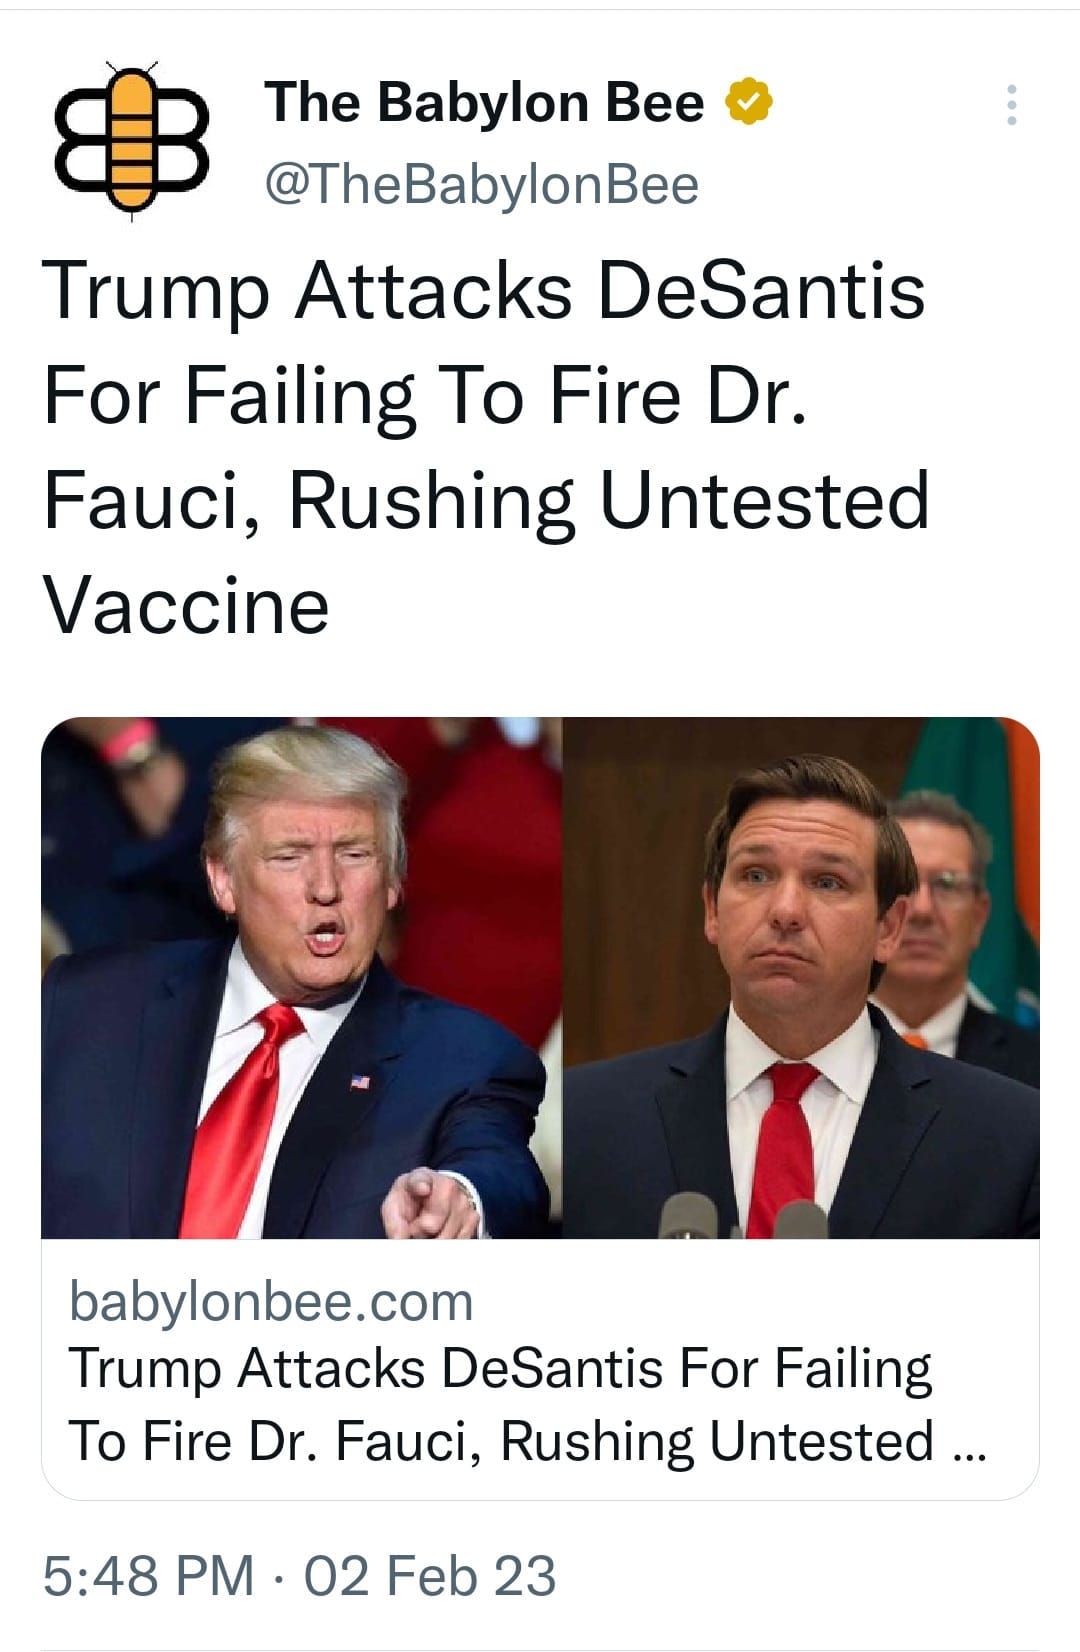 May be a Twitter screenshot of 2 people, people standing and text that says 'The Babylon Bee @TheBabylonBee Trump Attacks DeSantis For Failing Το Fire Dr. Fauci, Rushing Untested Vaccine babylonbee.com Trump Attacks DeSantis For Failing To Fire Dr. Fauci, Rushing Untested... 5:48 PM 02 Feb 23'